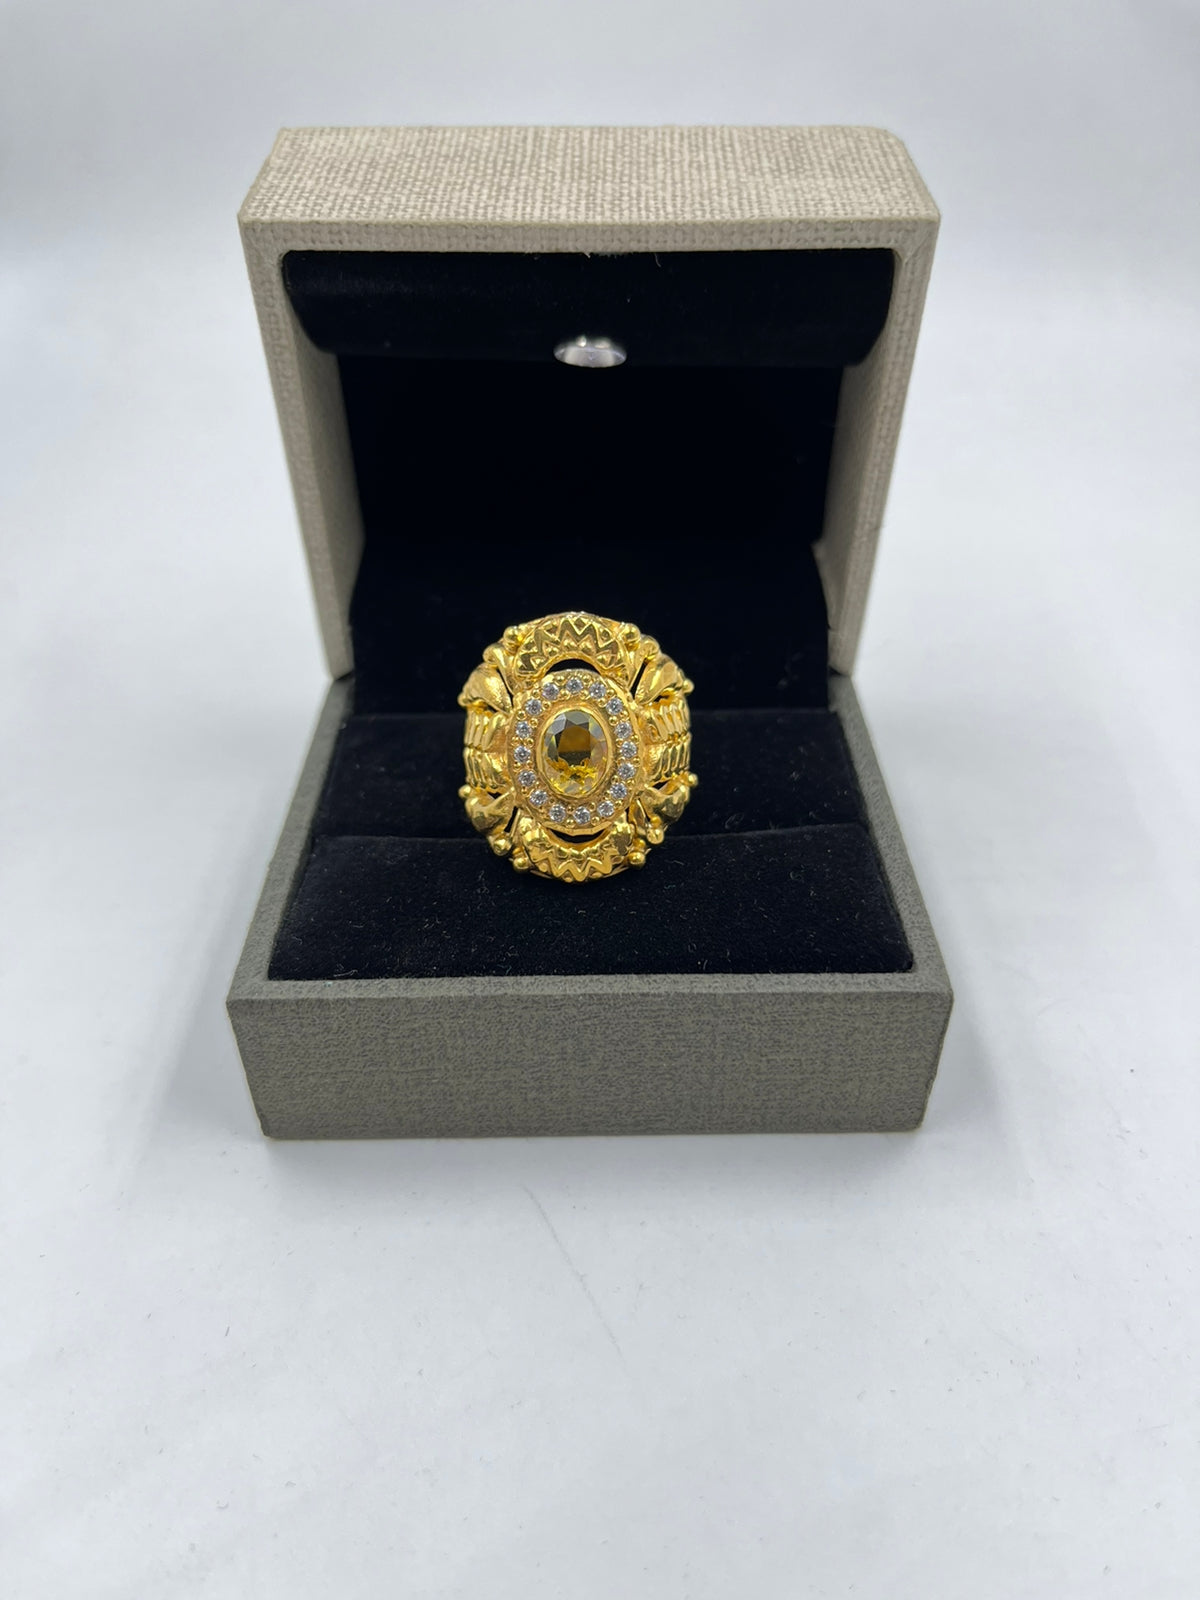 Buy quality 916 Gold Nazrana Gents Ring in Ahmedabad